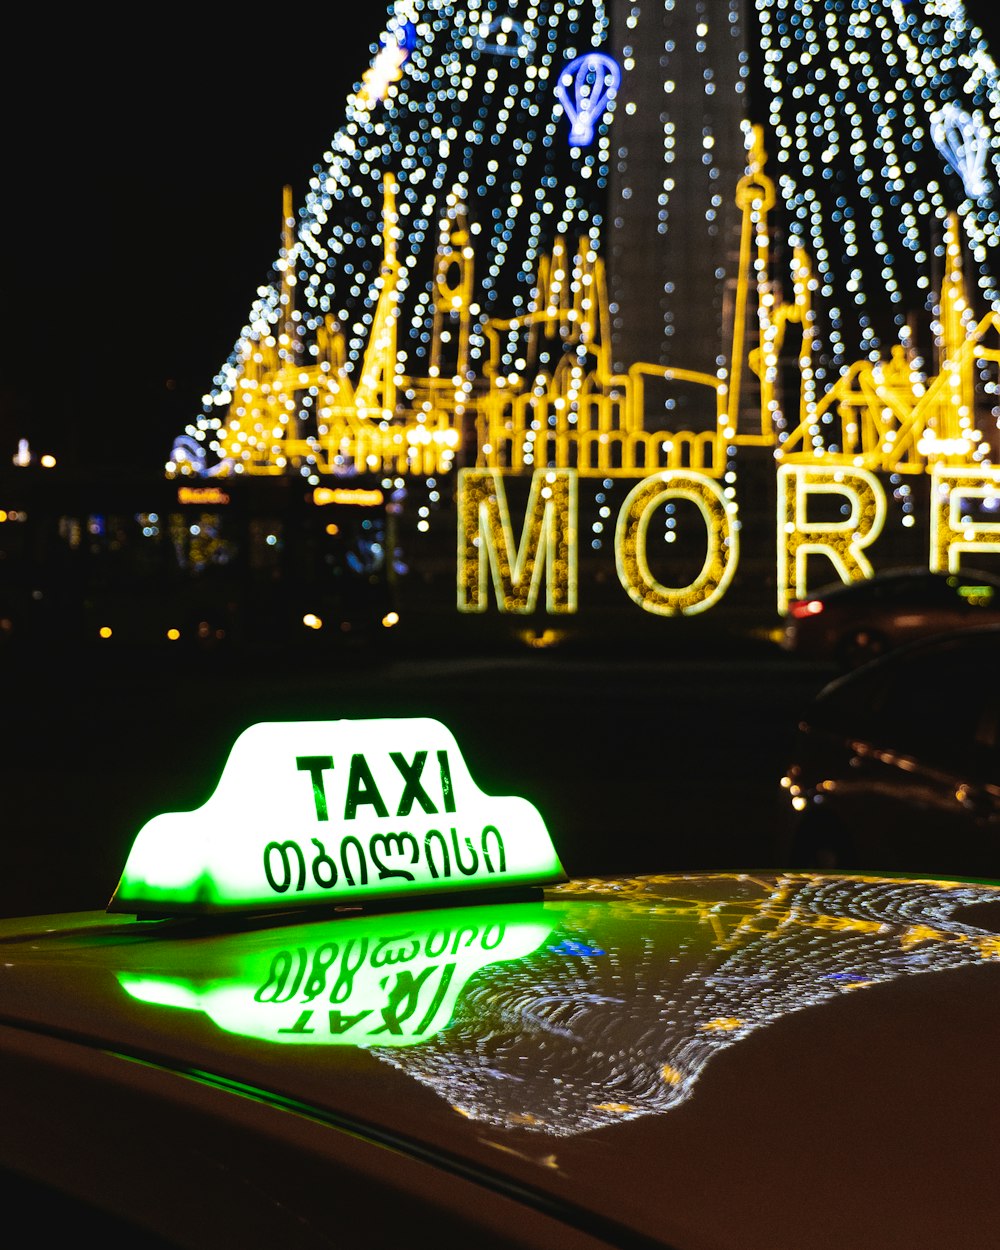 a taxi cab with a christmas tree in the background